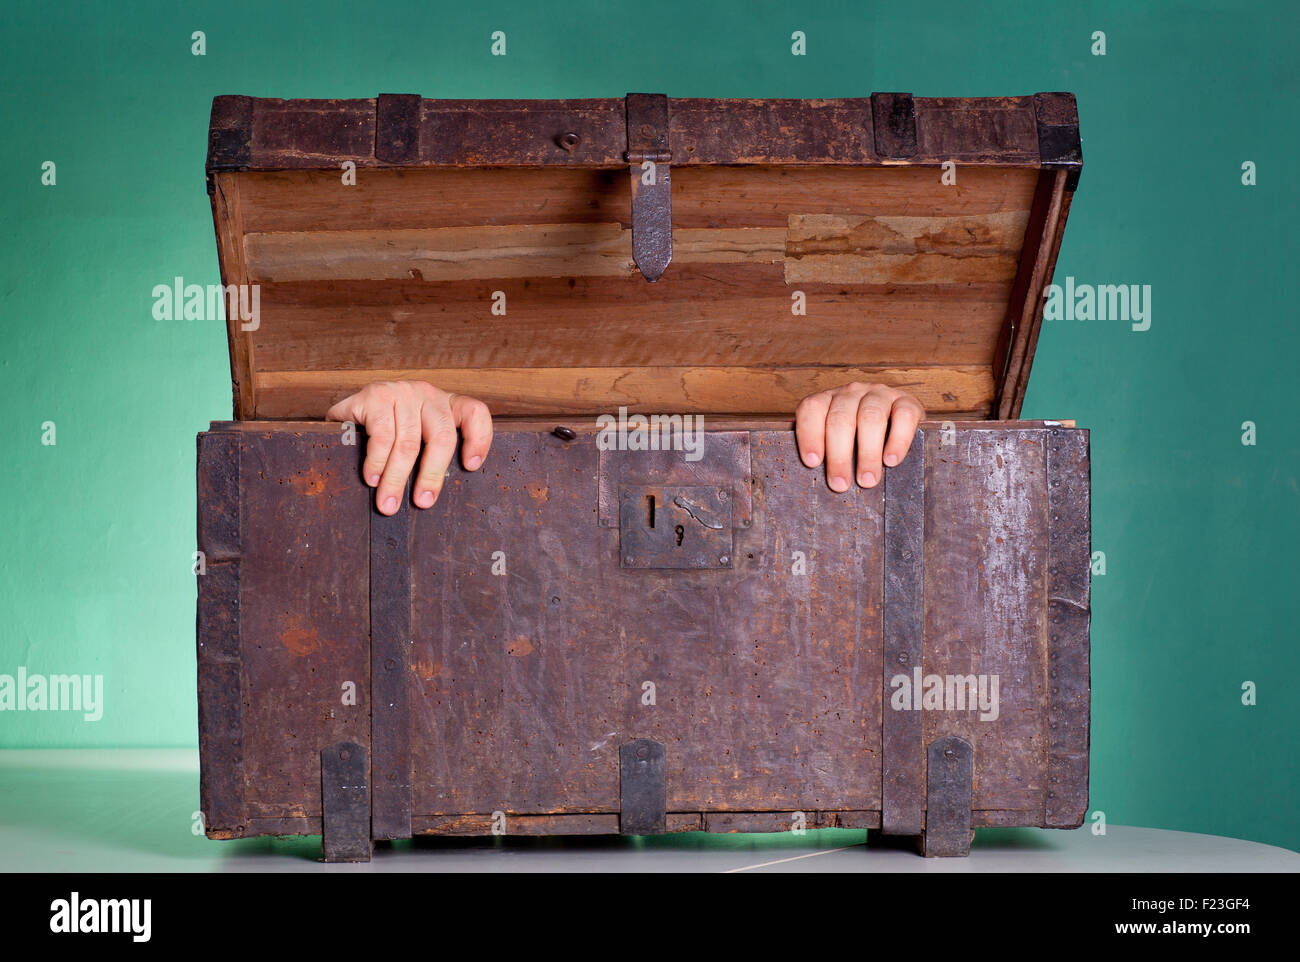 Hands coming out the Antique wooden trunk Stock Photo